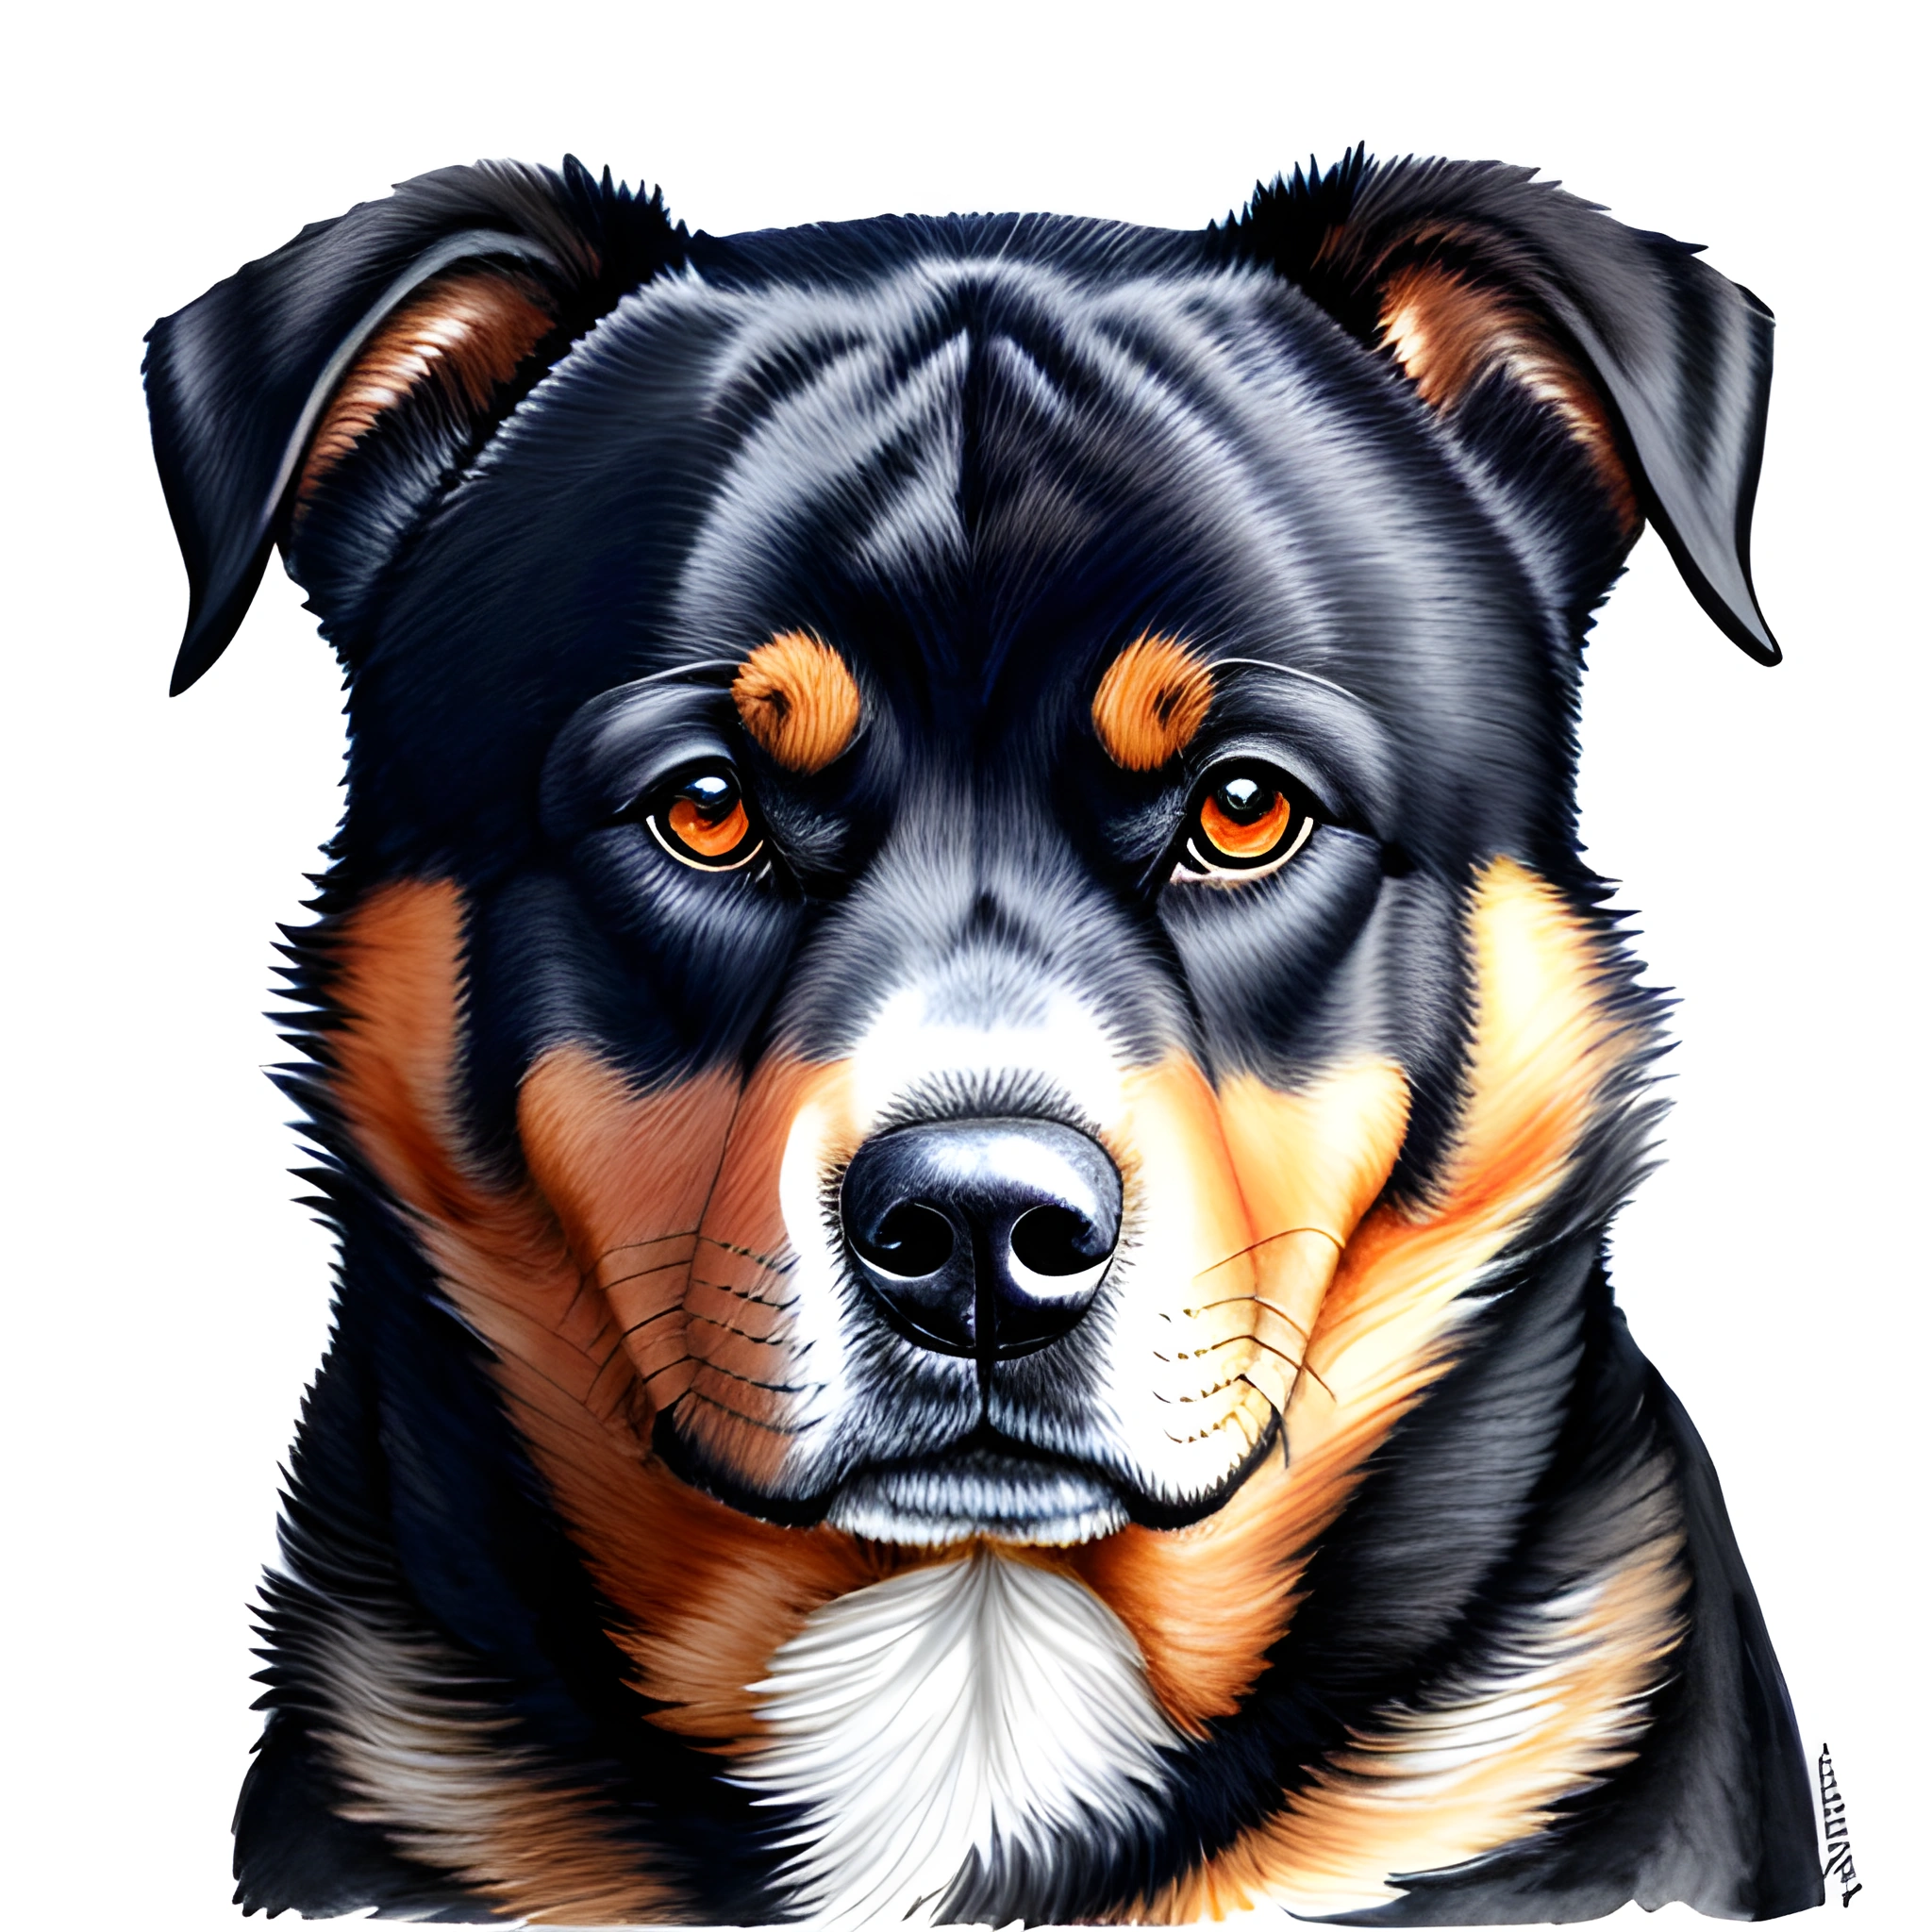 painting of a dog with a black and brown face and orange eyes